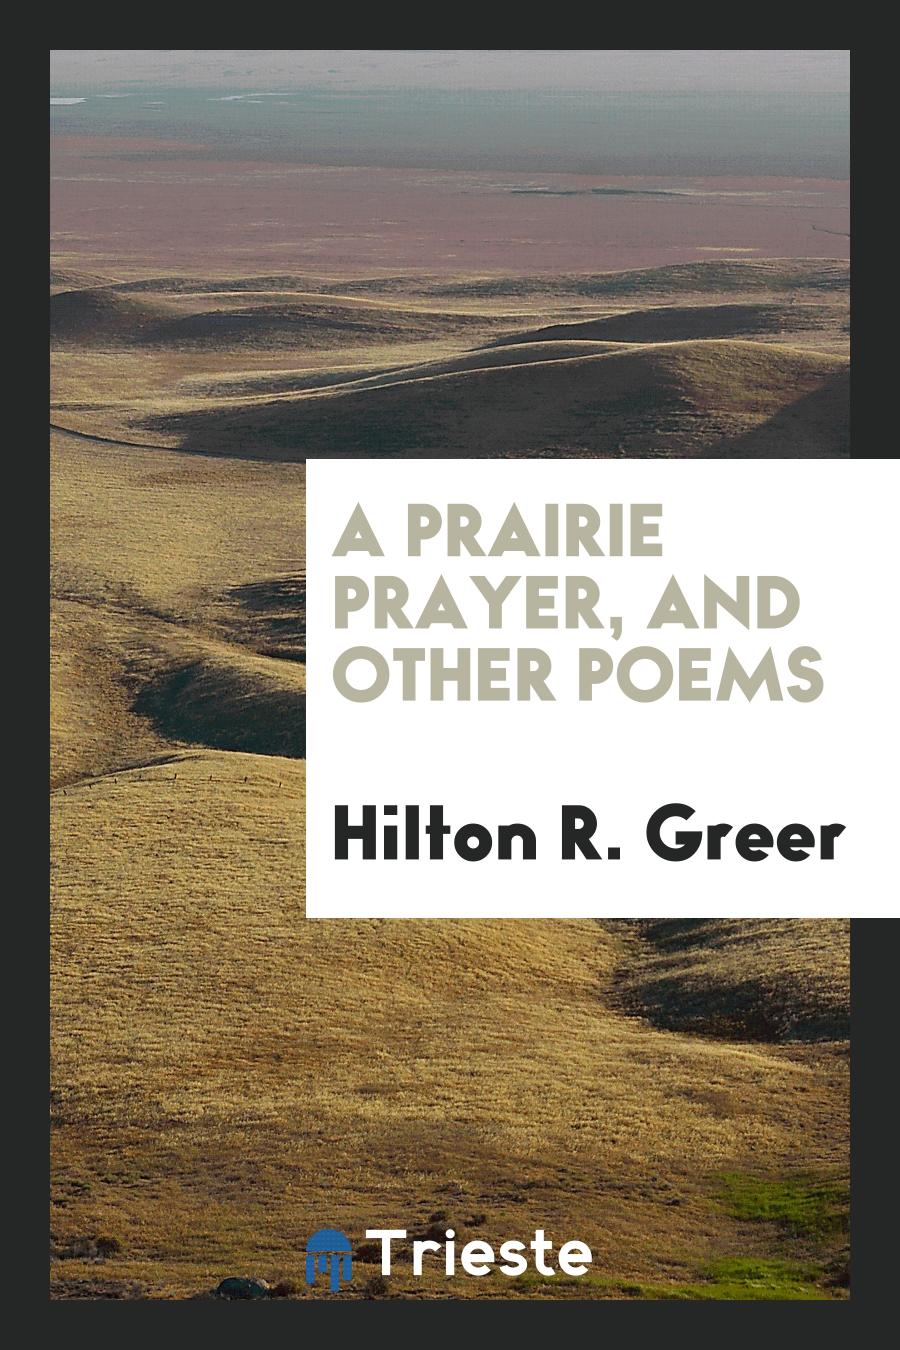 A Prairie Prayer, and Other Poems